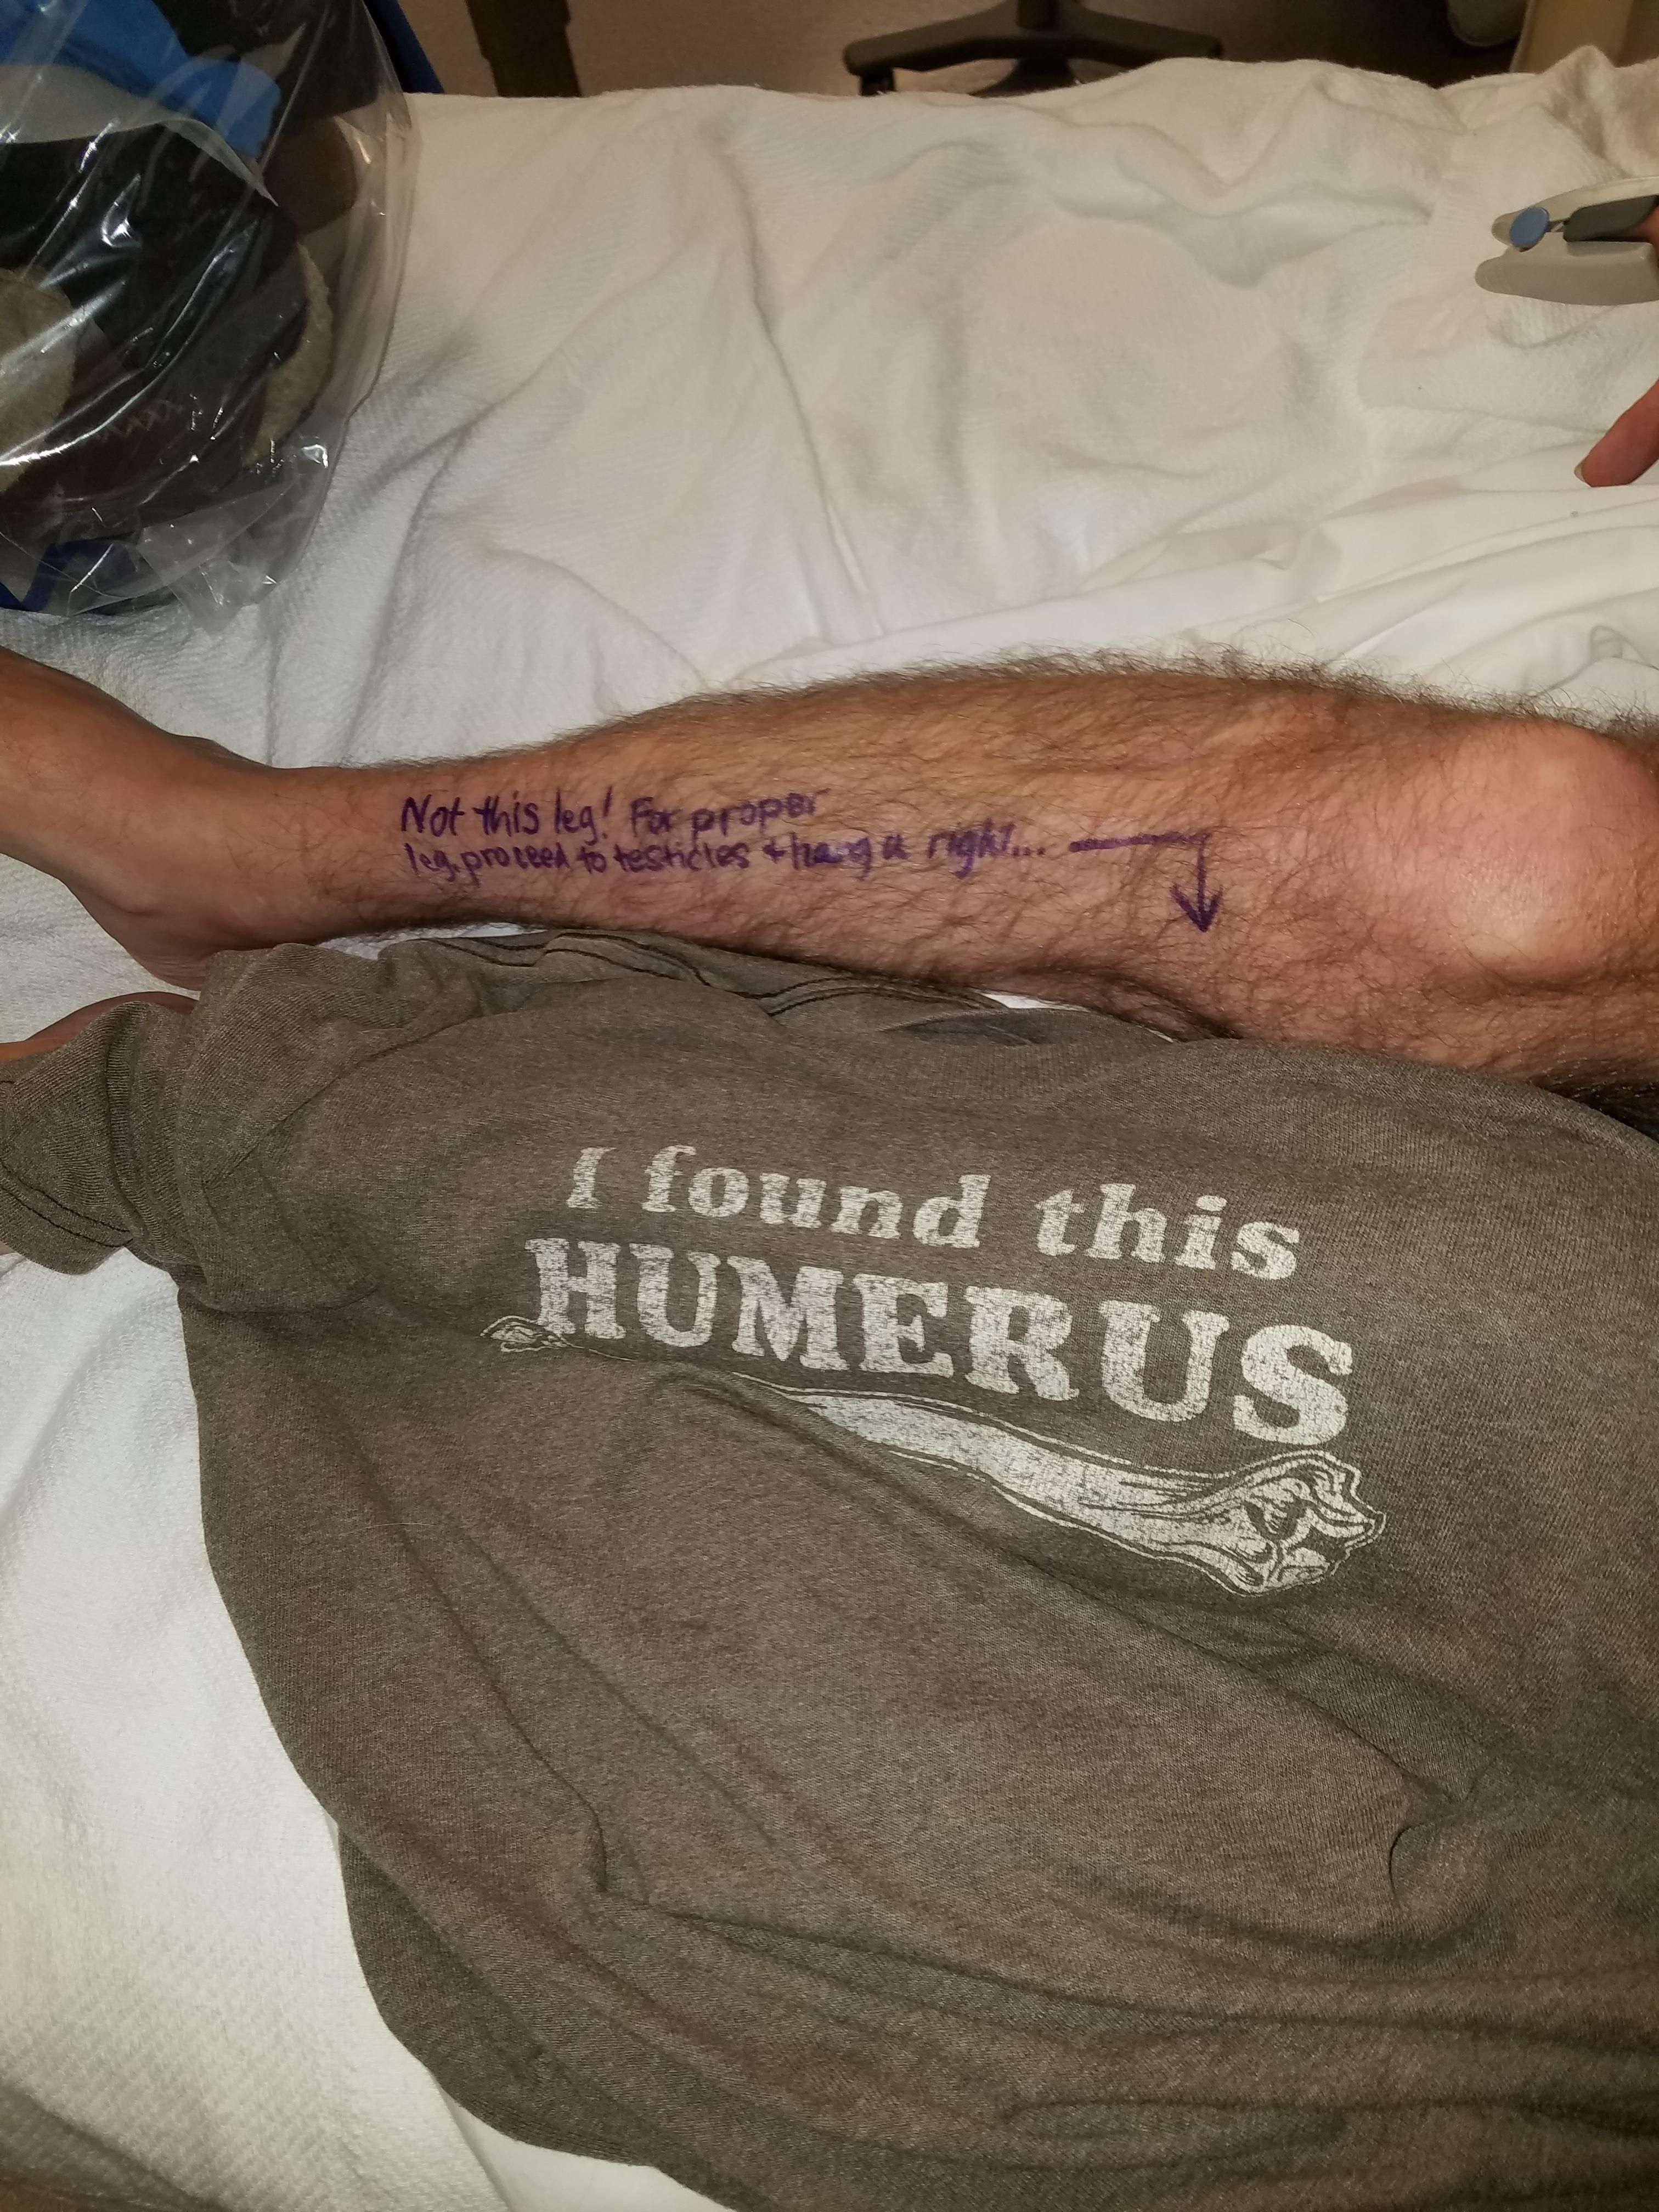 I'm having my left leg amputated today. I wore this shirt and wrote this on my leg for the surgeons. If I couldn't laugh about it...